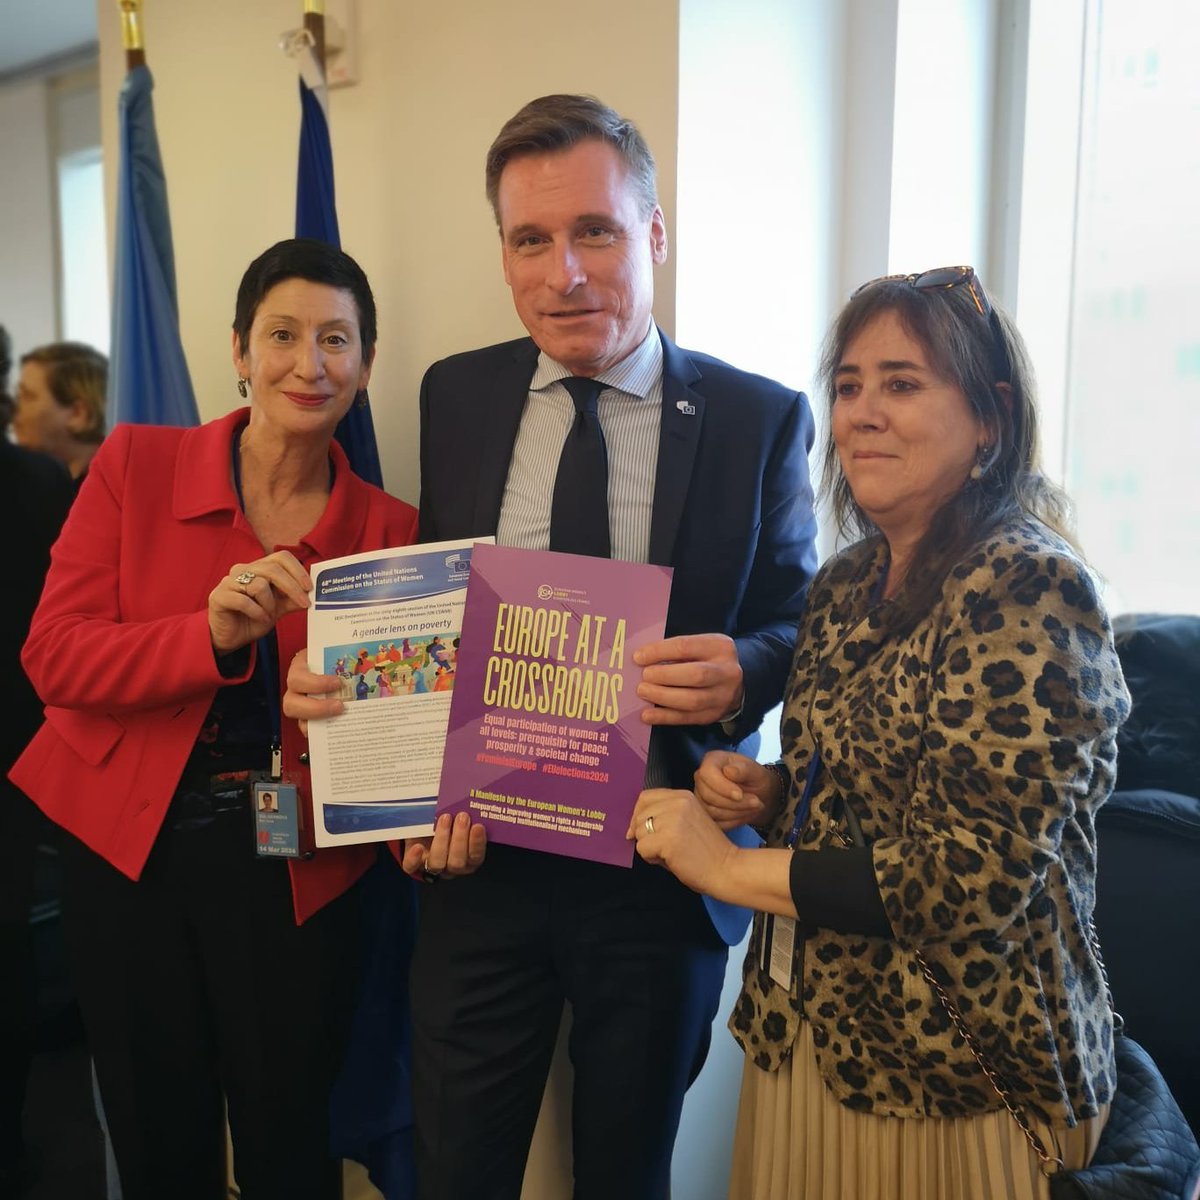 Women's rights are not only a women's issue. We thank Oliver Röpke, @EESC_President for his work on addressing the economic and social inequalities that women & girls face across the EU! Read our vision for a #FeministEurope👇 womenlobby.org/Manifesto2024 #InvestInWomen #CSW68